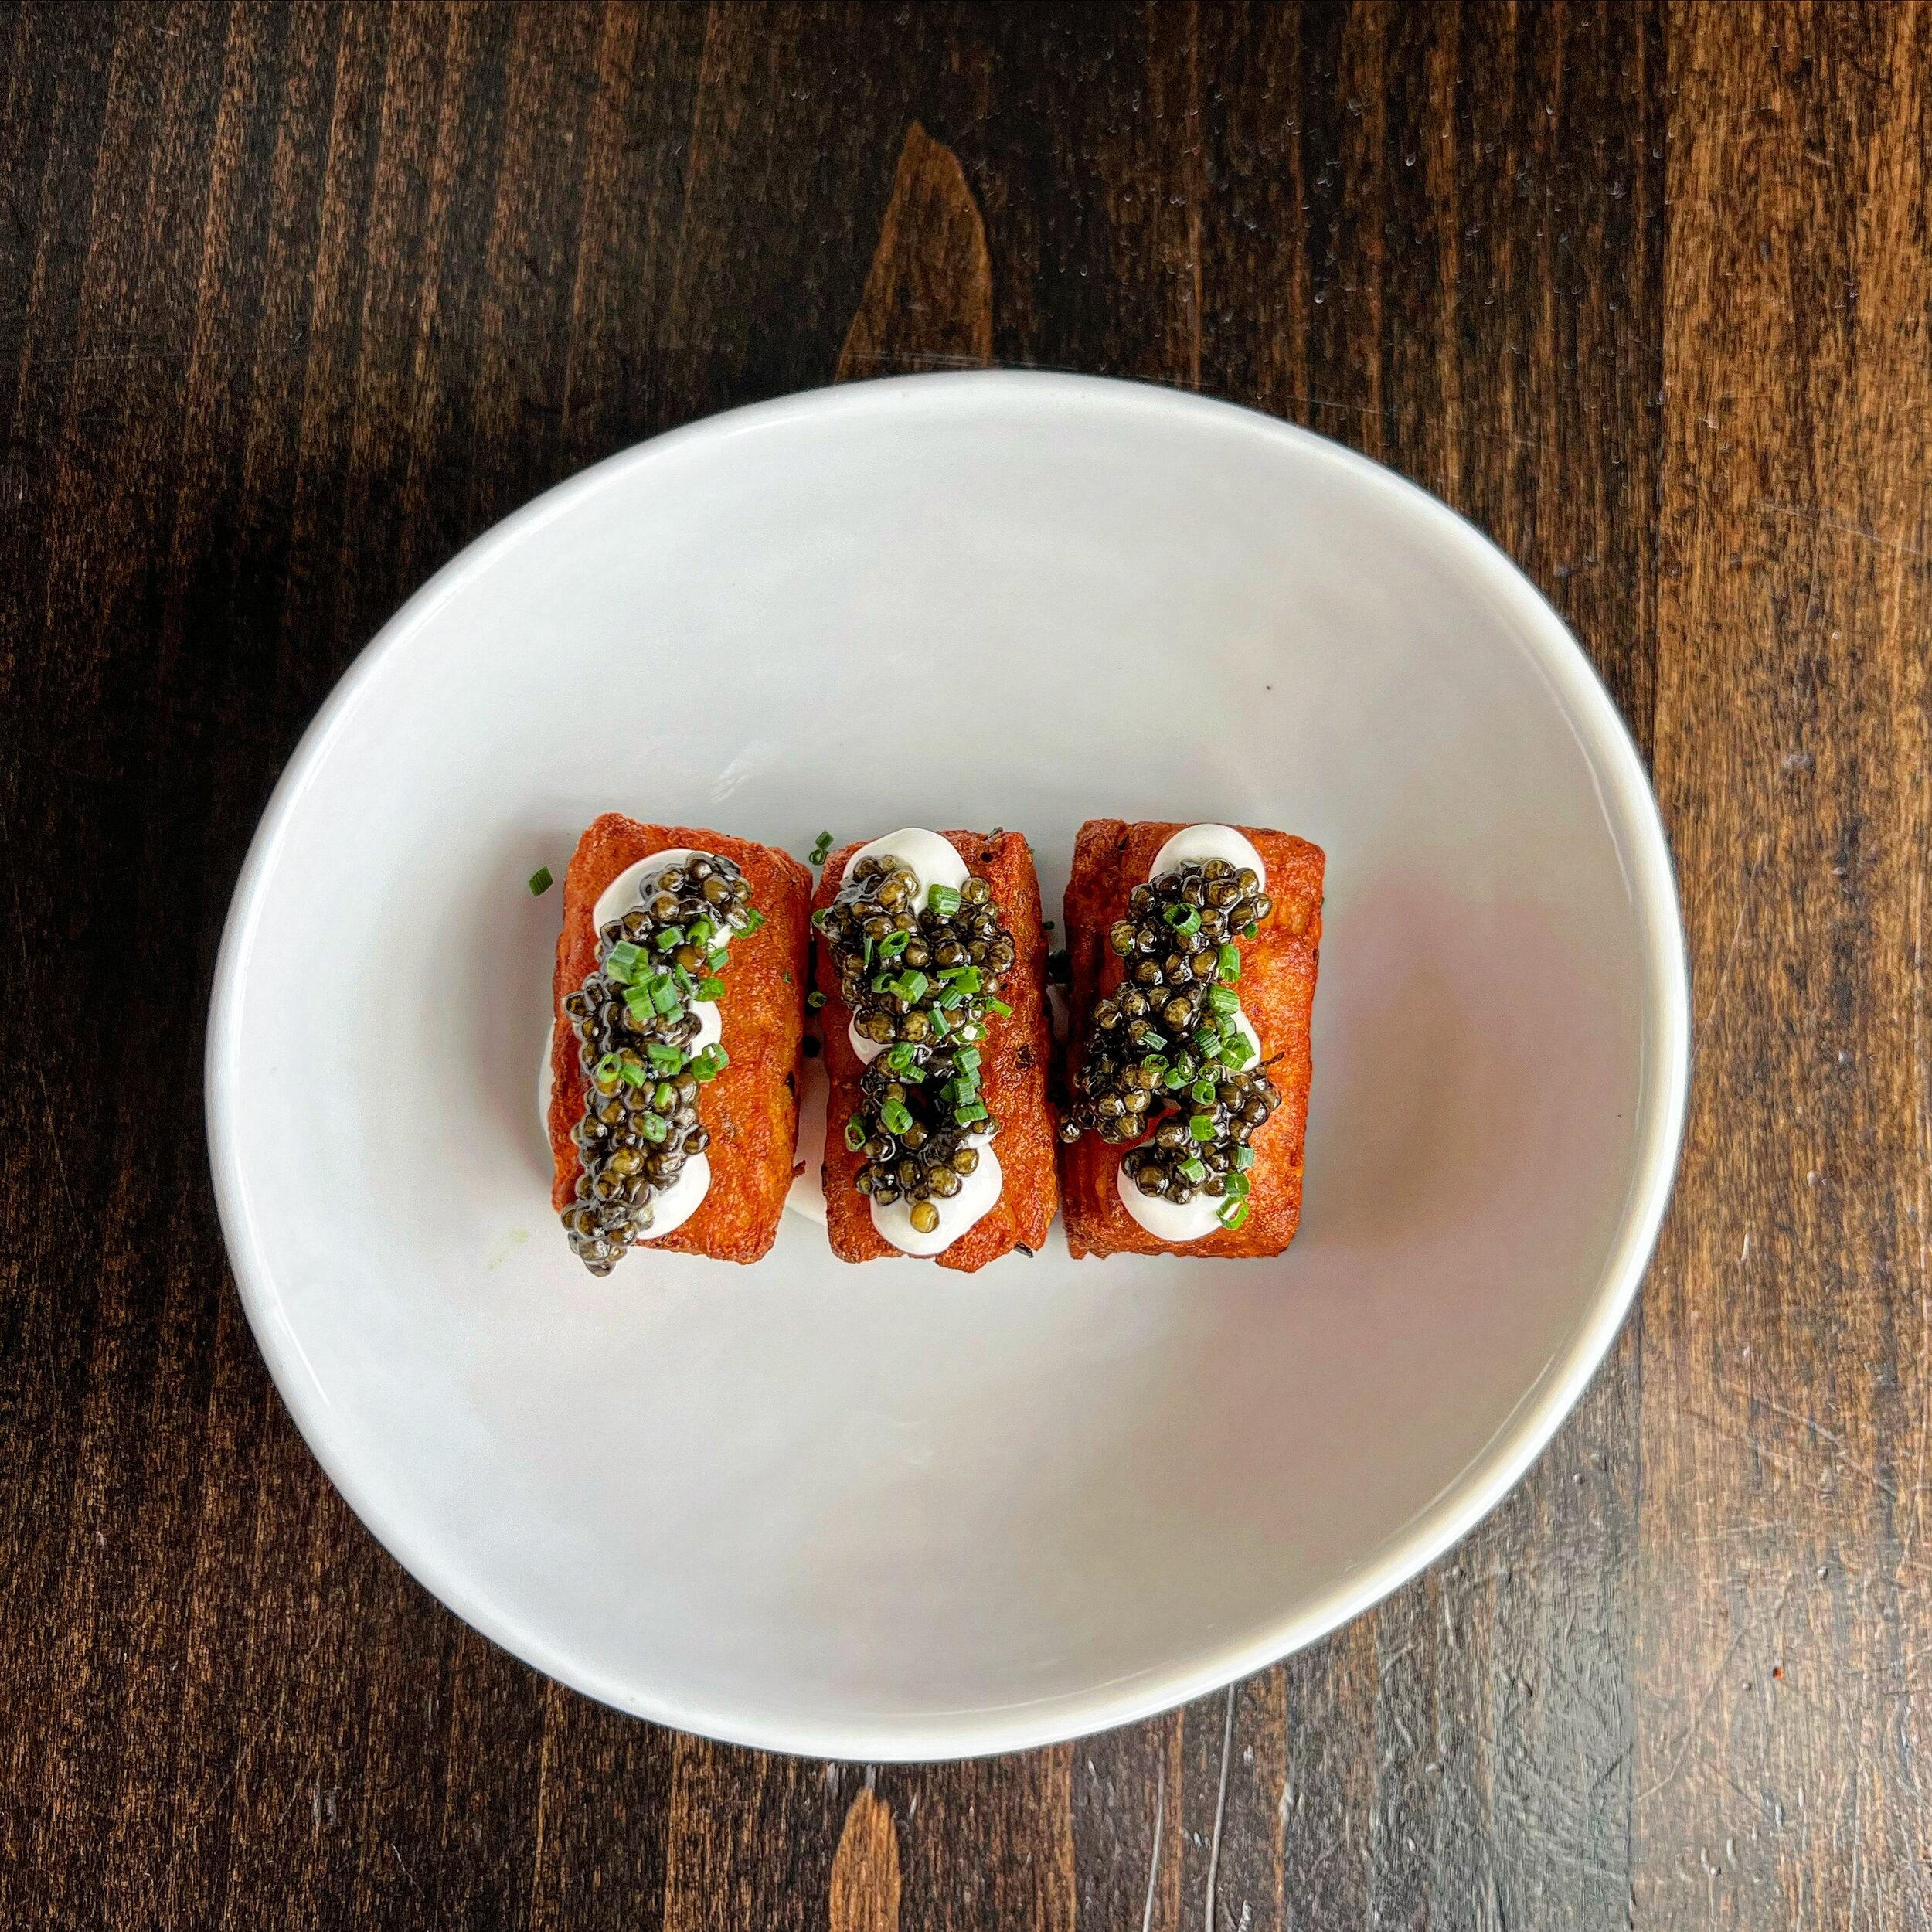 On Valentine&rsquo;s Day at our sister spot @travelingmerciesbar we put these insanely delicious potato and caviar bites on the menu. And we haven&rsquo;t stopped thinking about them since&hellip;

So it only makes sense to bring them back to life do